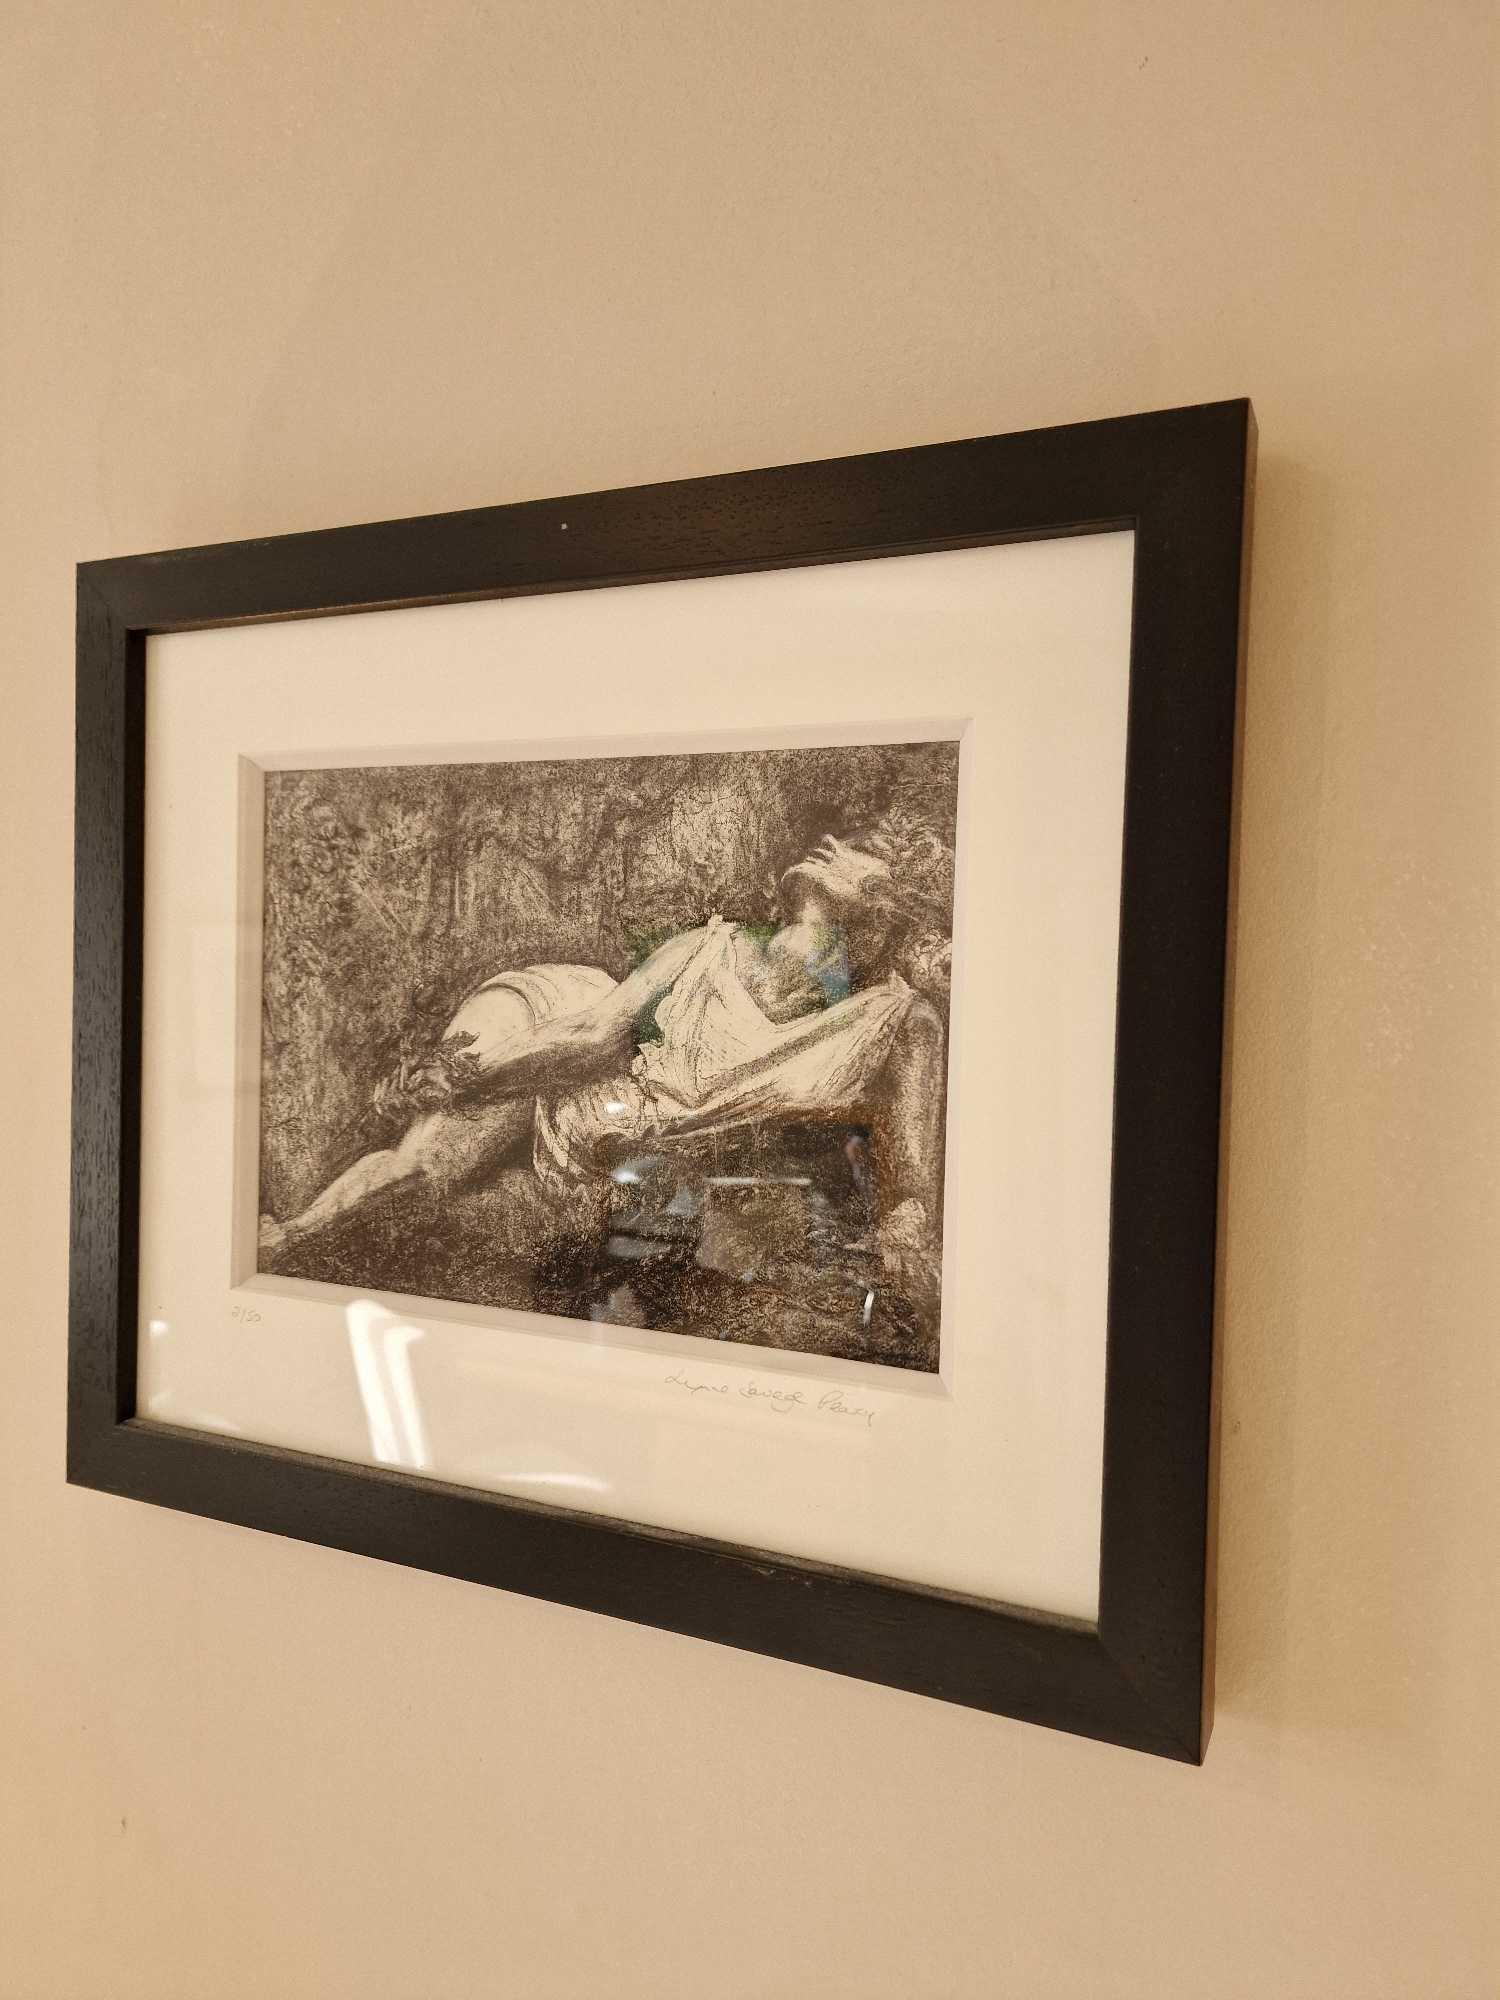 2 x Framed Artwork By Lynne Savege Peacy Signed Limited Edition 17/50 Charcoal And Pencil Of